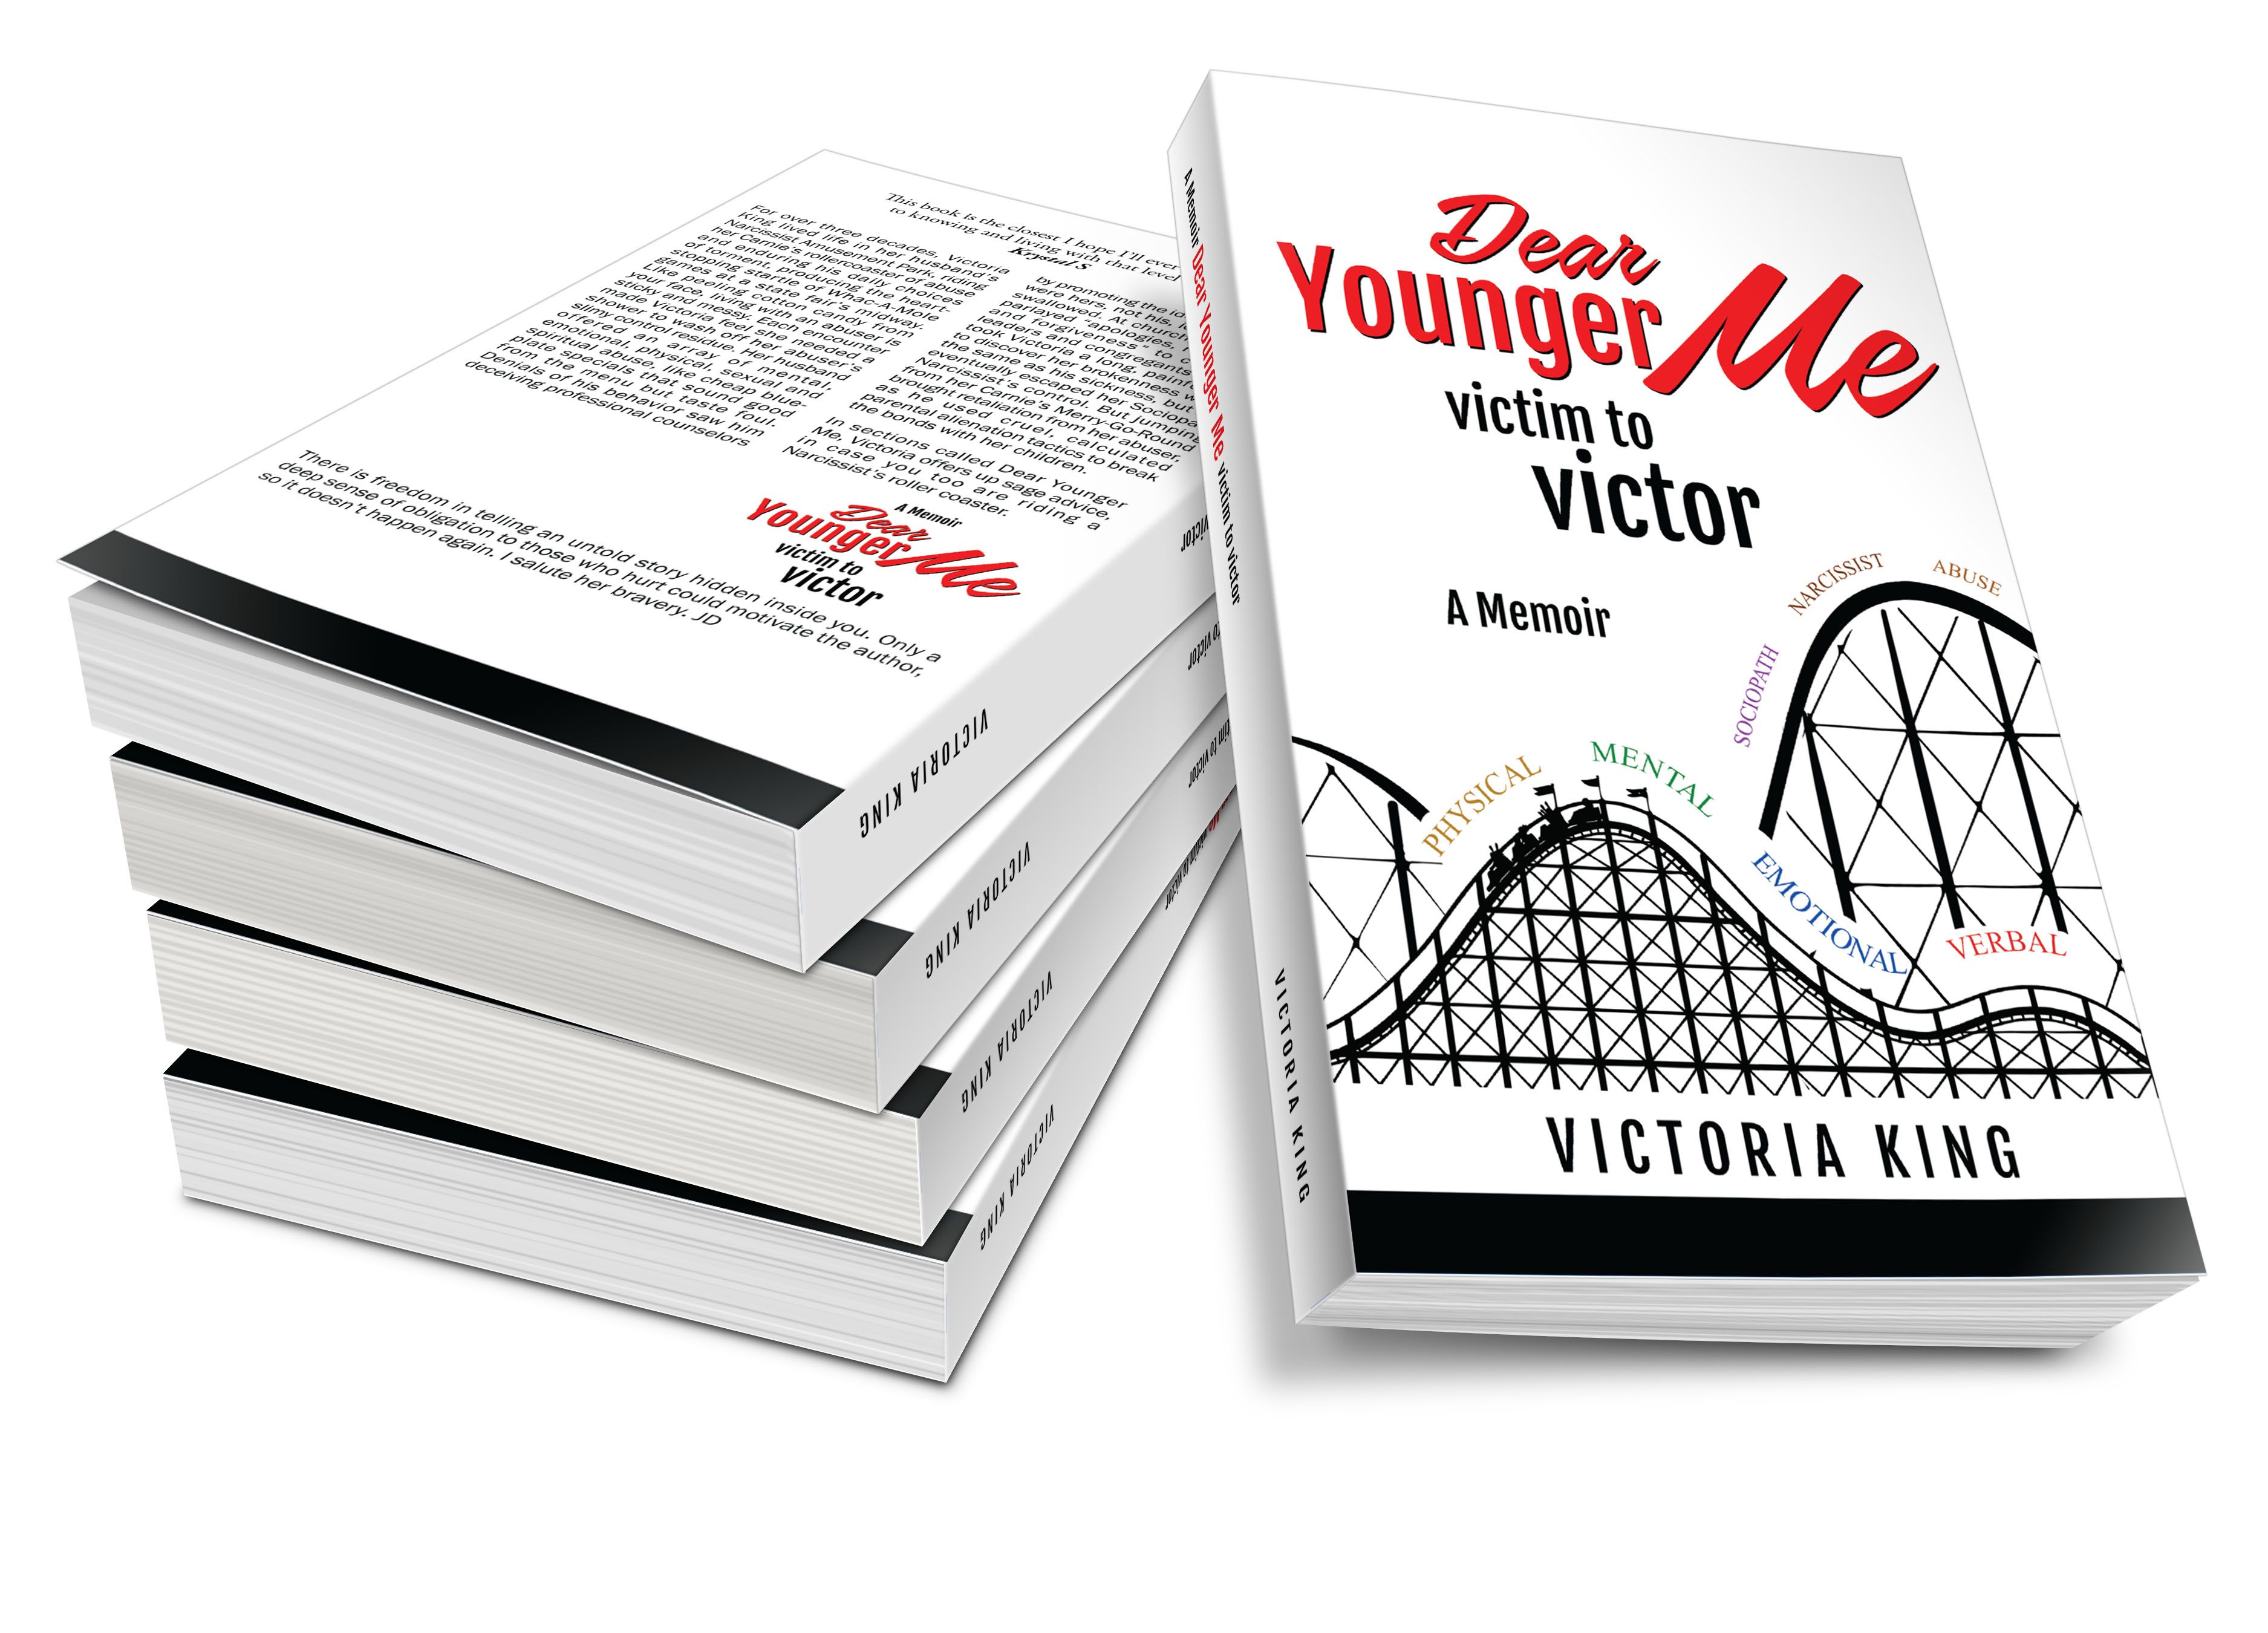 Dear Younger Me book display for amazon.jpg